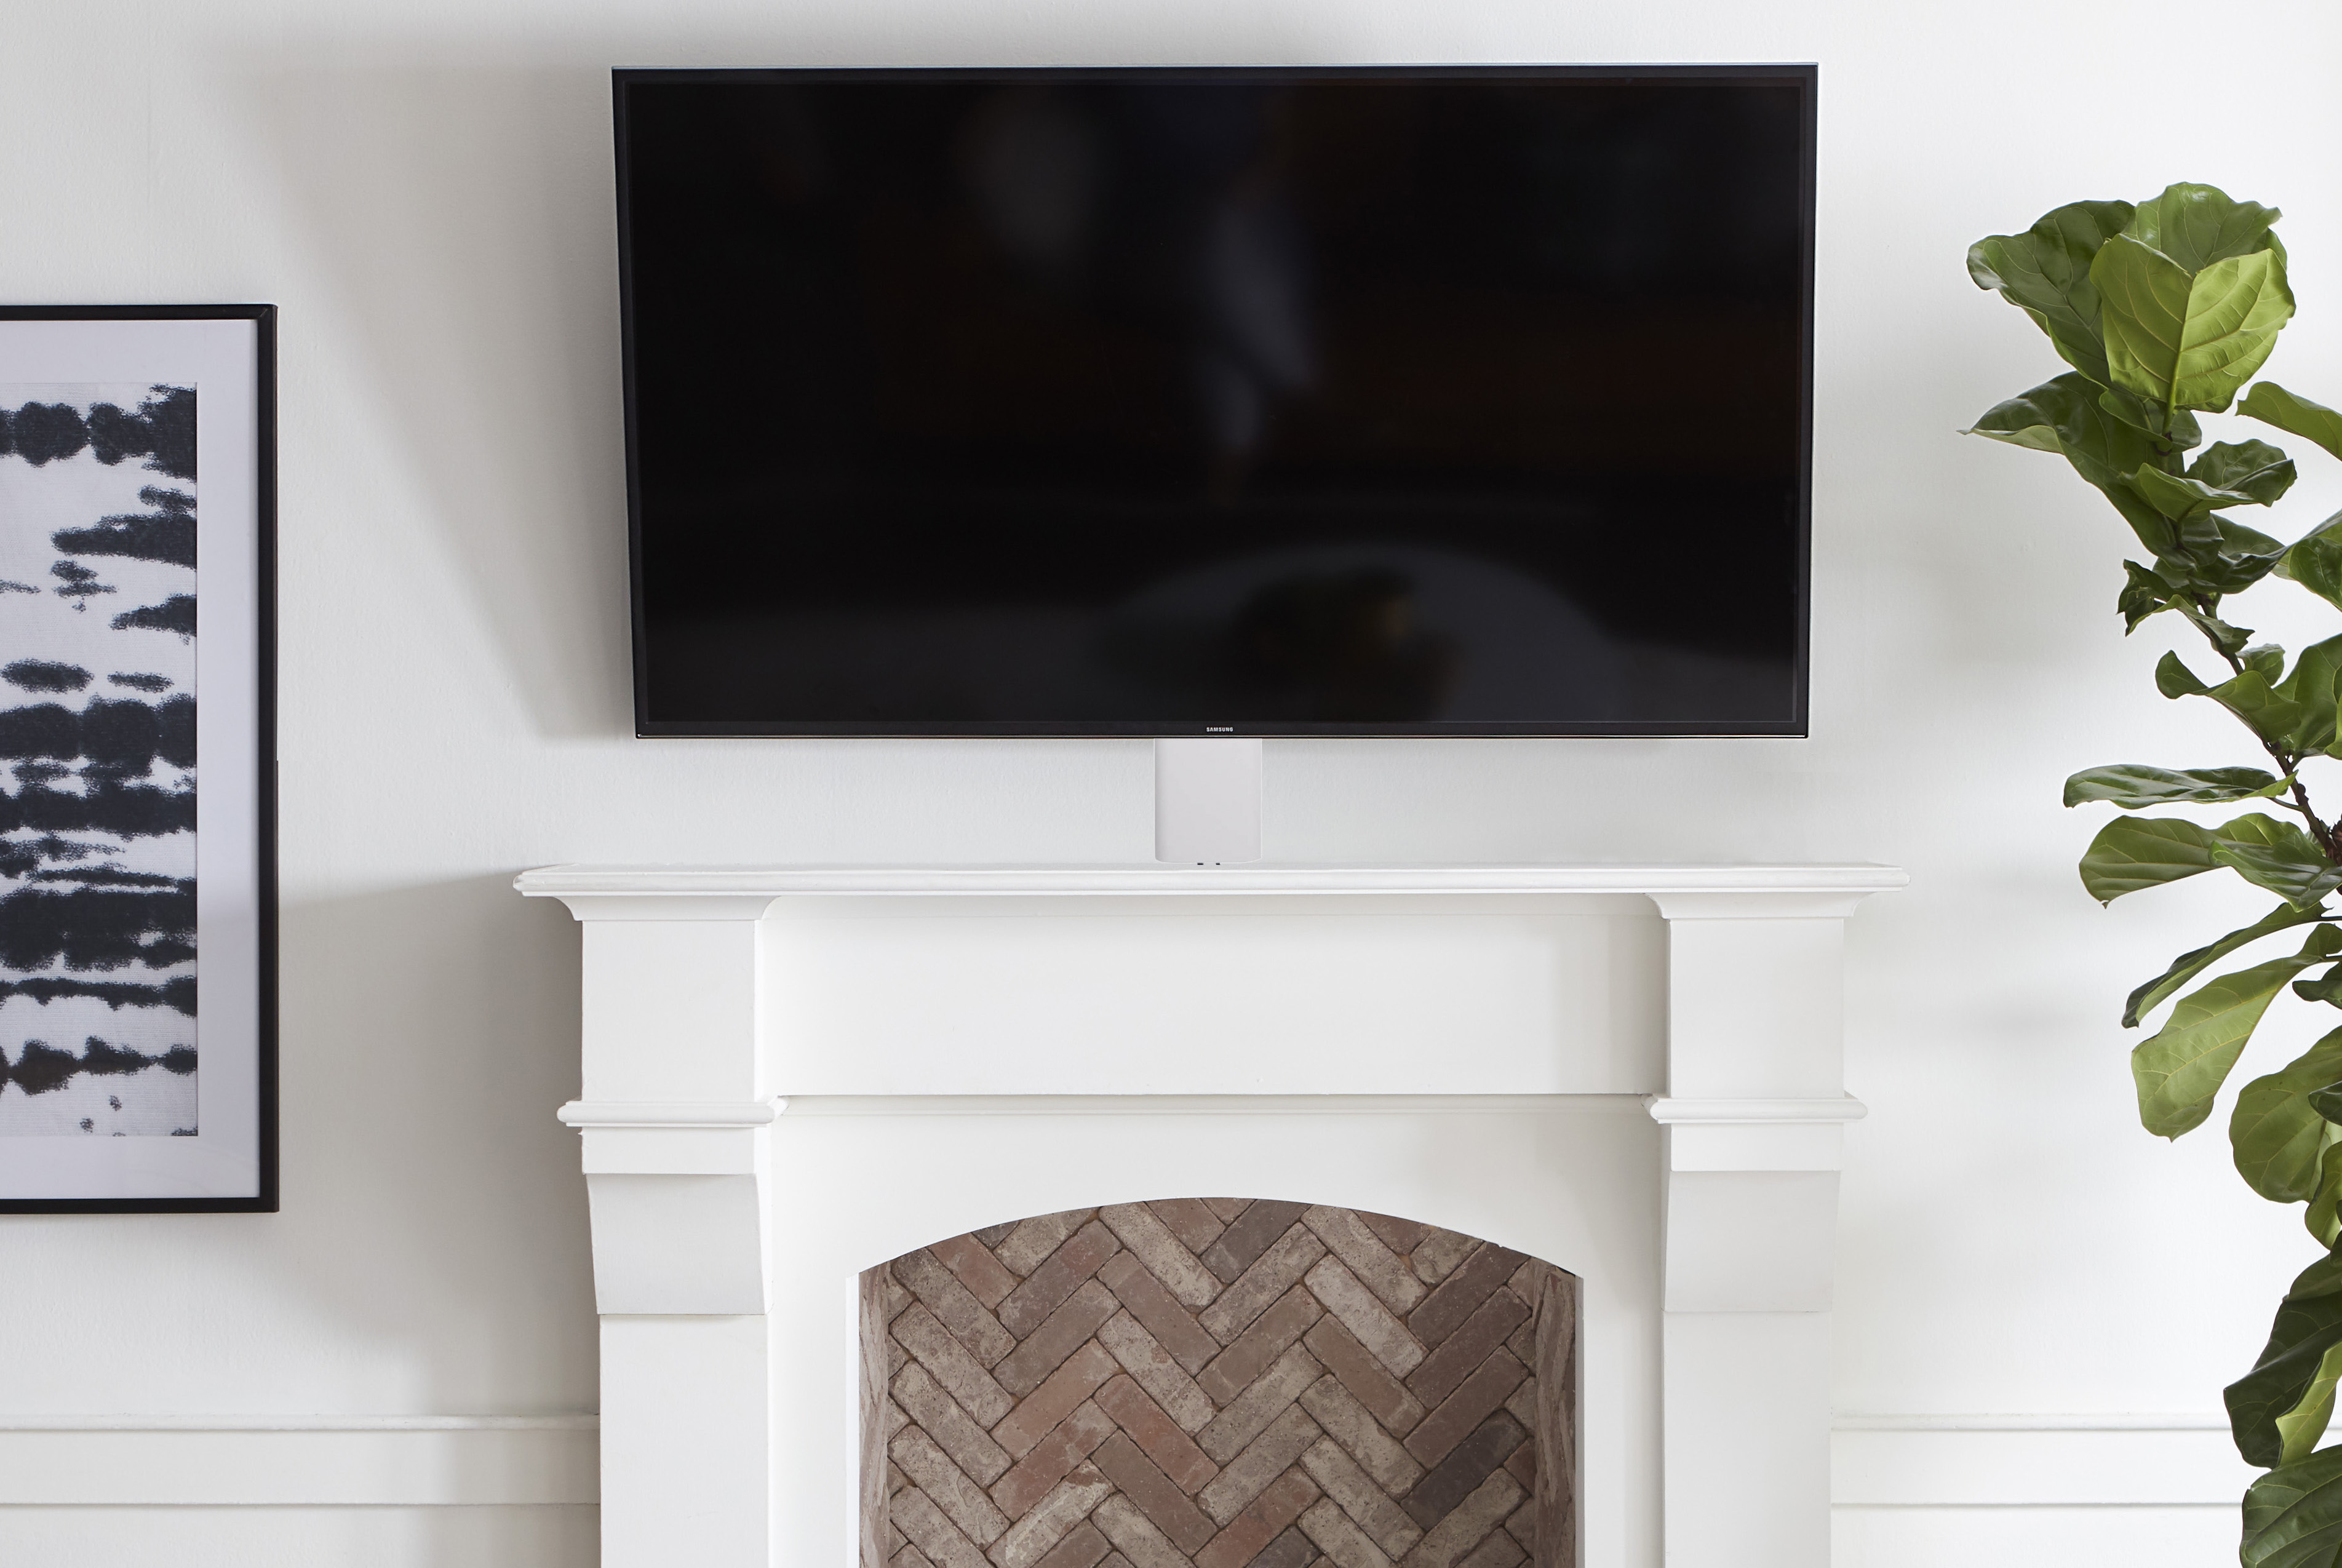 Mounting A Tv Over Fireplace How, How To Mount A Flat Screen Tv Over Fireplace